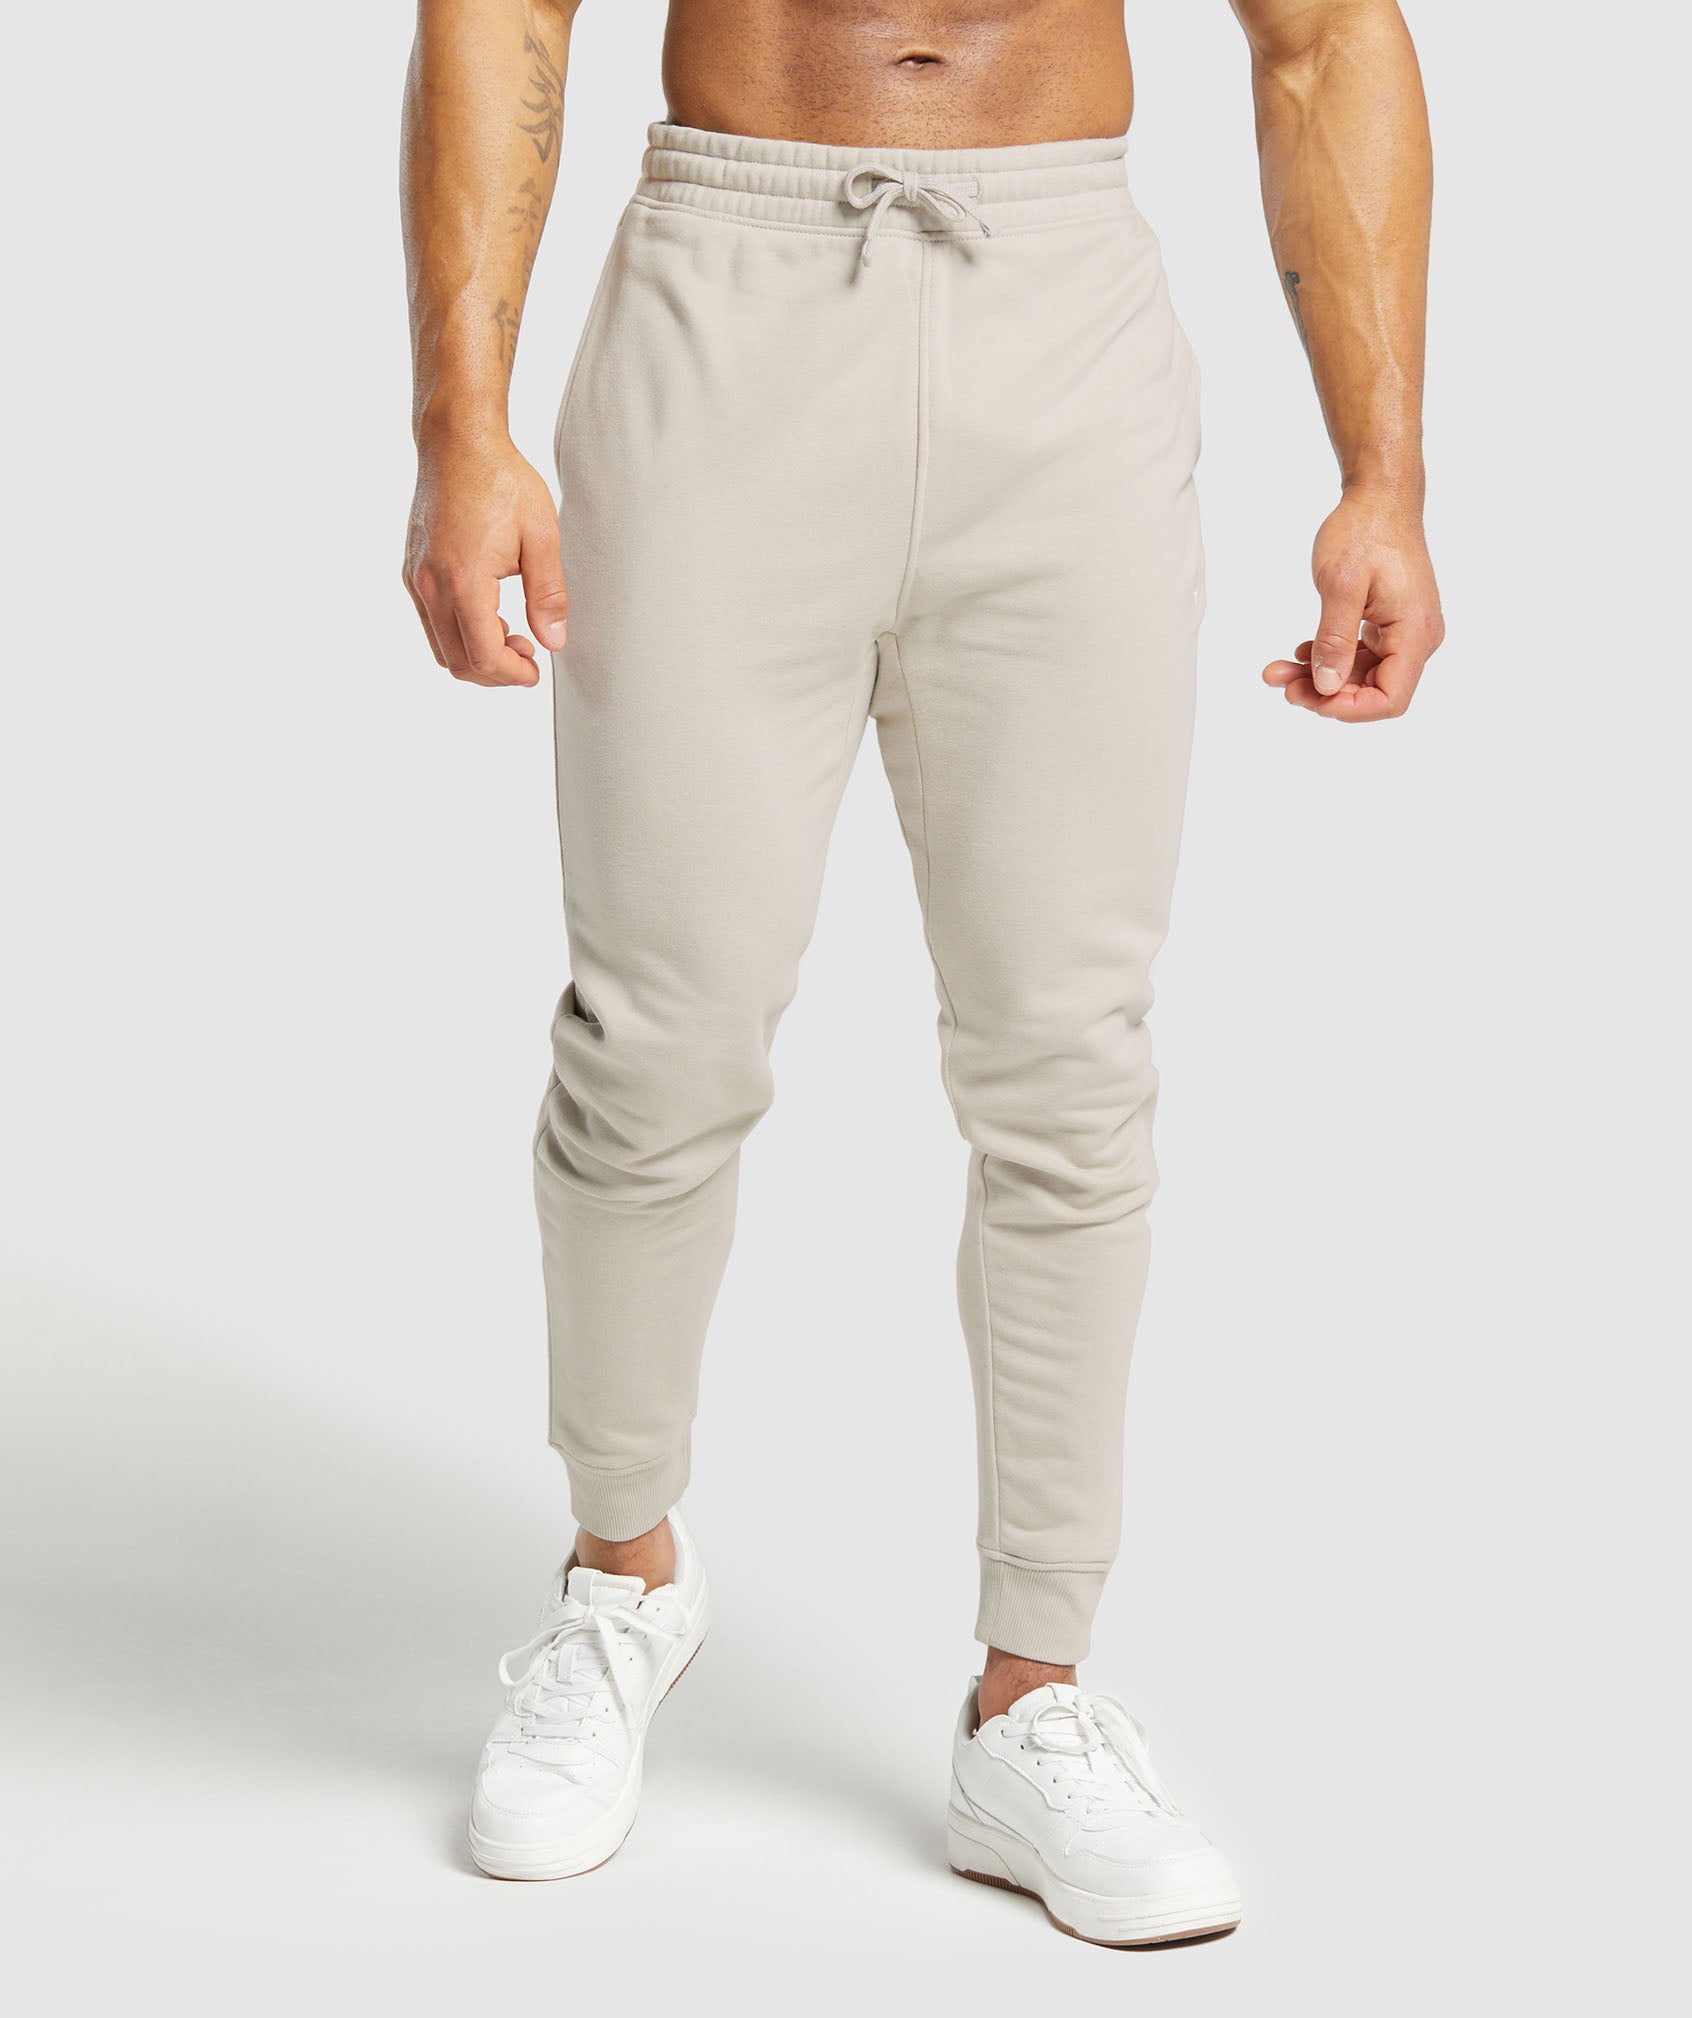 Crest Joggers in Pebble Grey